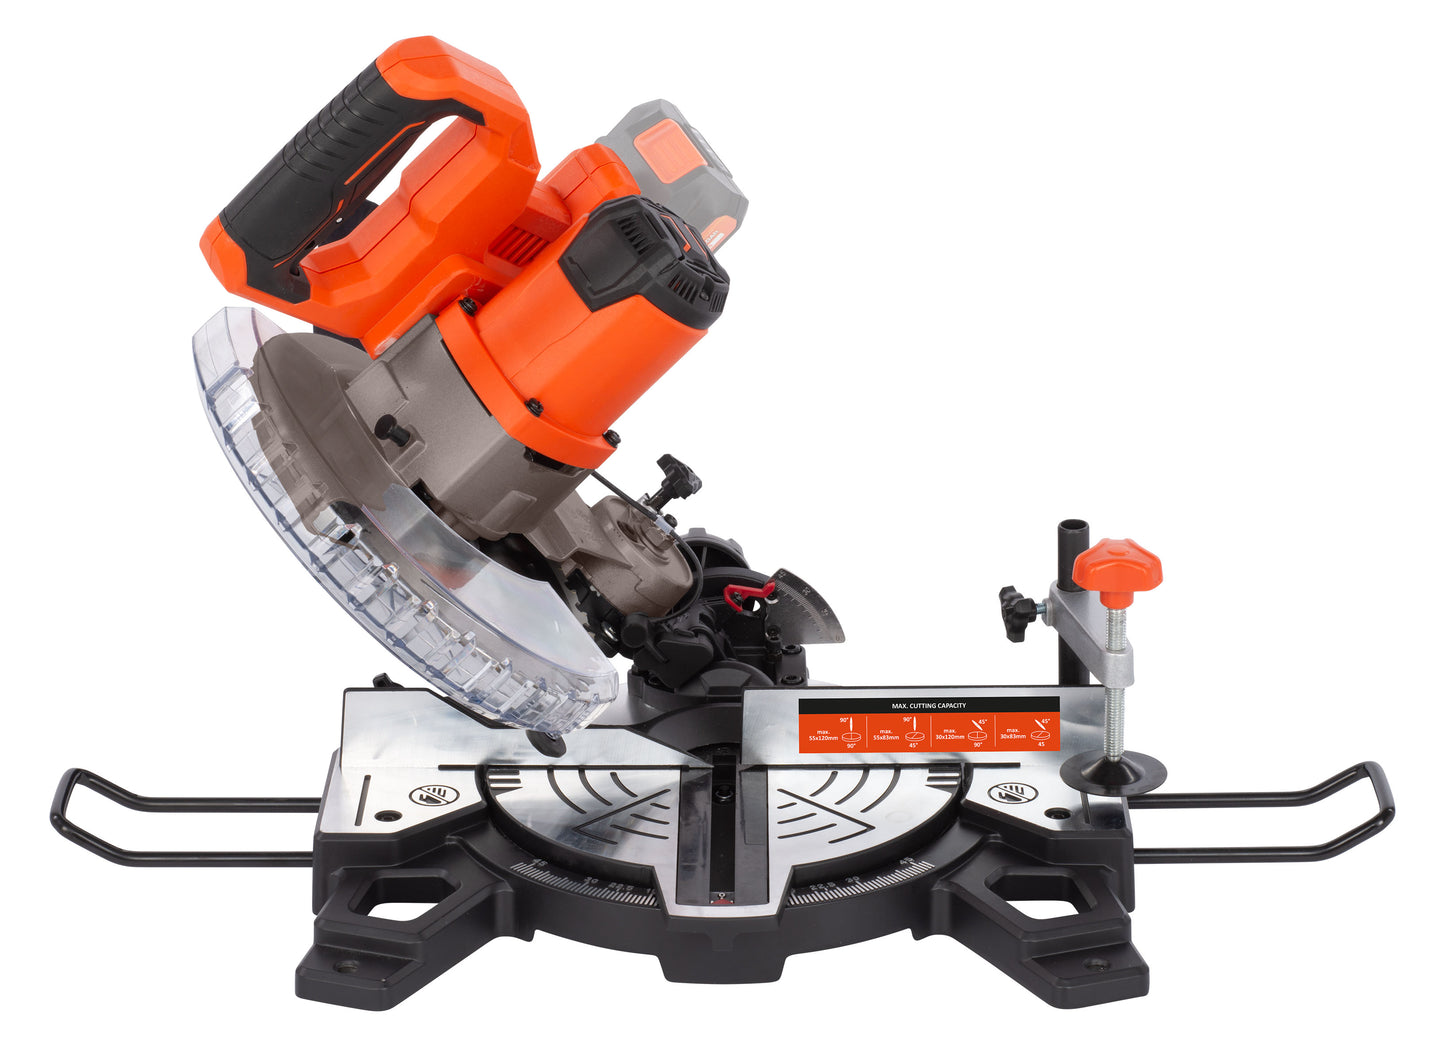 Dual Power - 20V Cordless Mitre Saw - 55mm (unit only)